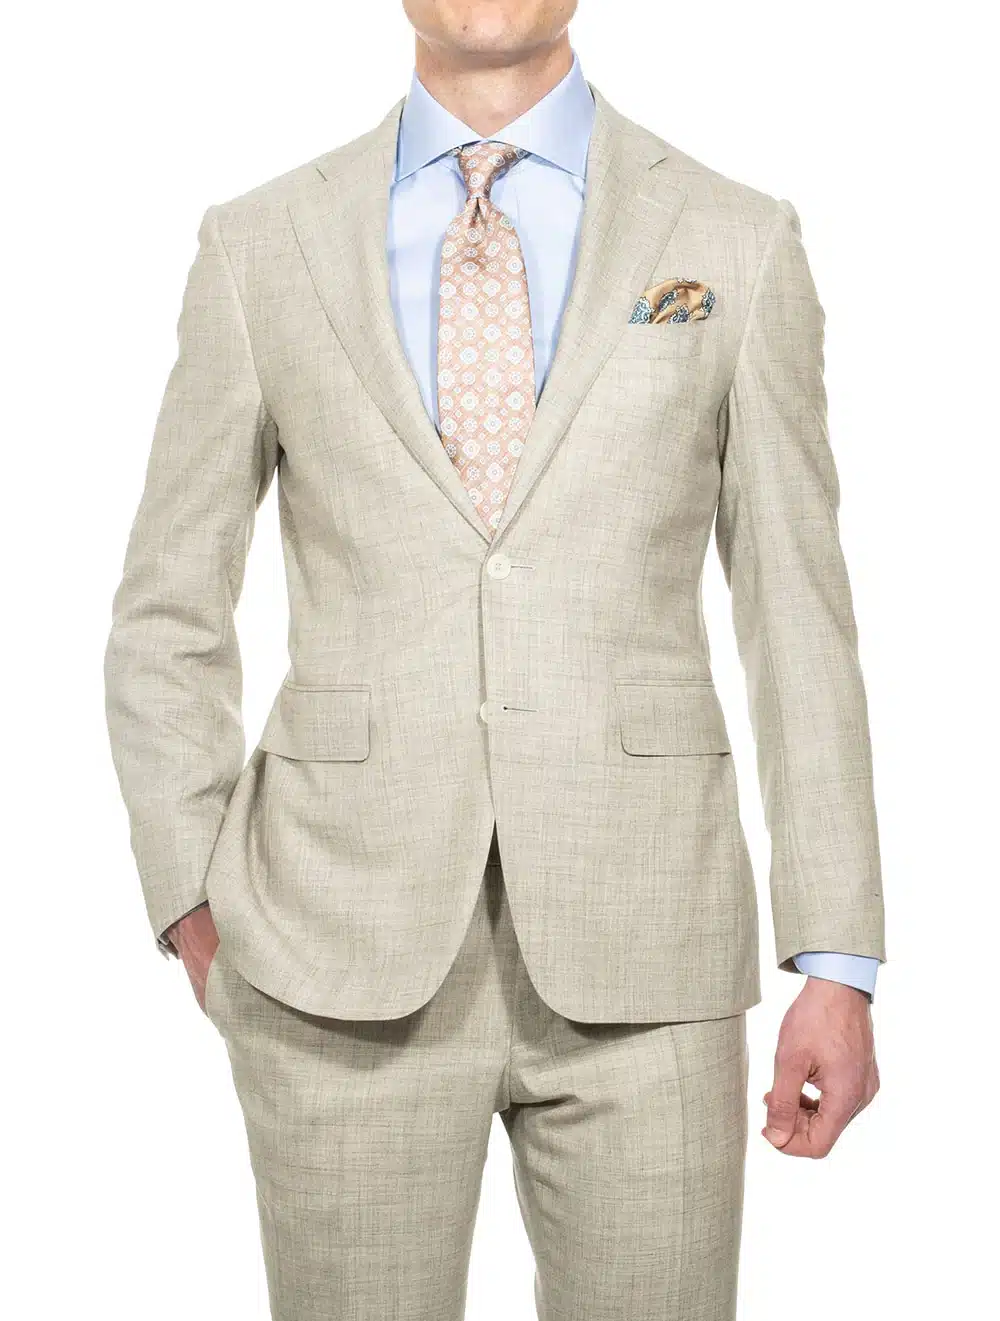 Suiting from Louis Copeland & Sons